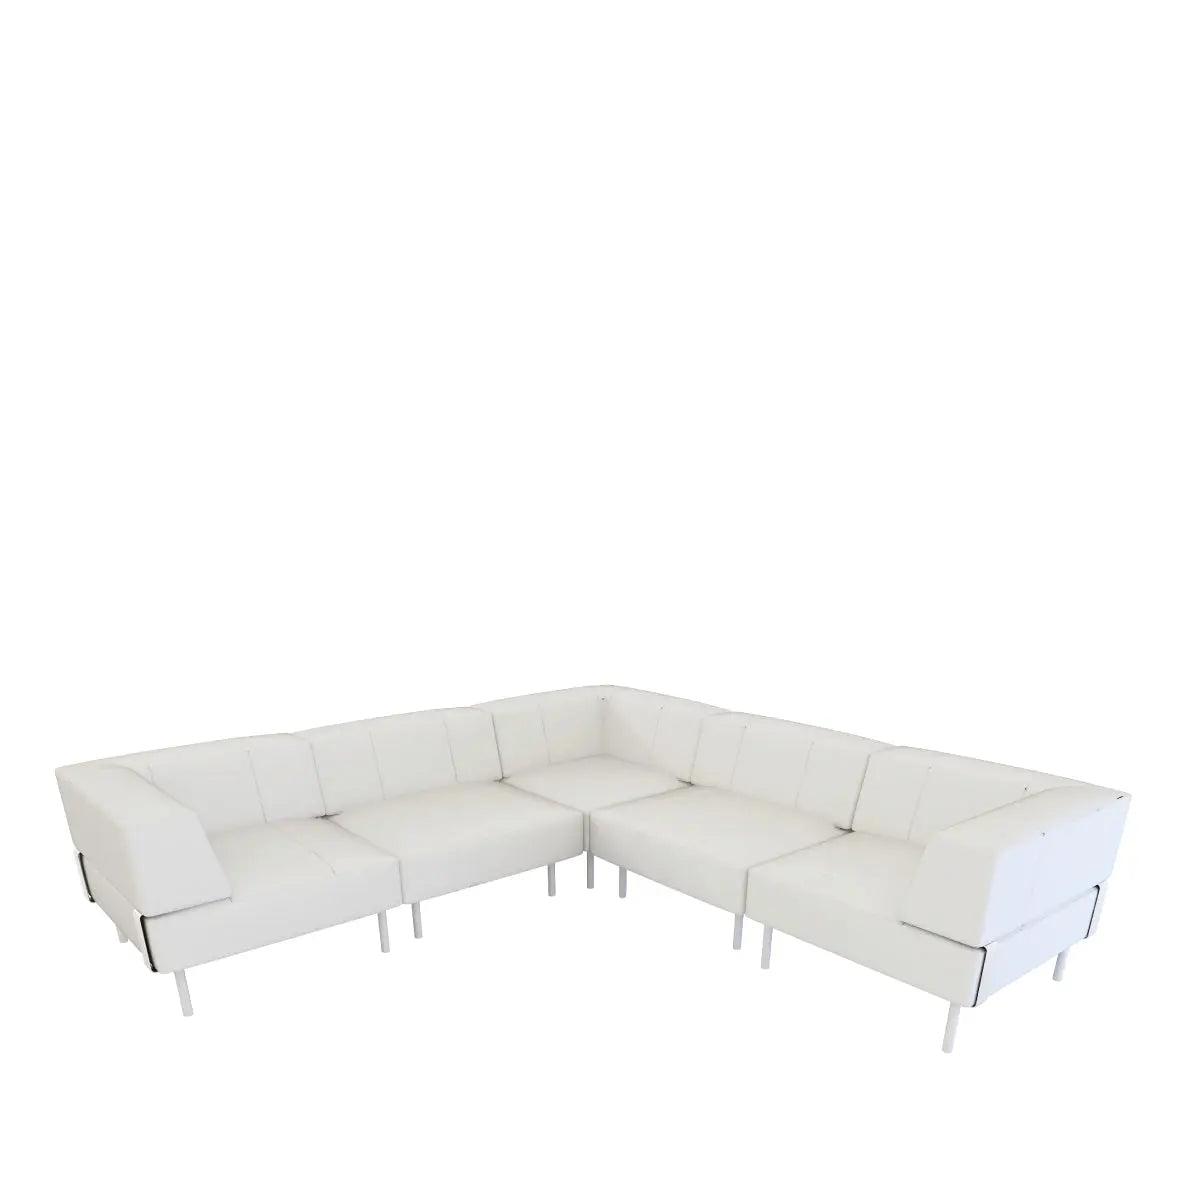 Endless 6 seater square xlarge sofa with back and arm rests Desert River Rentals